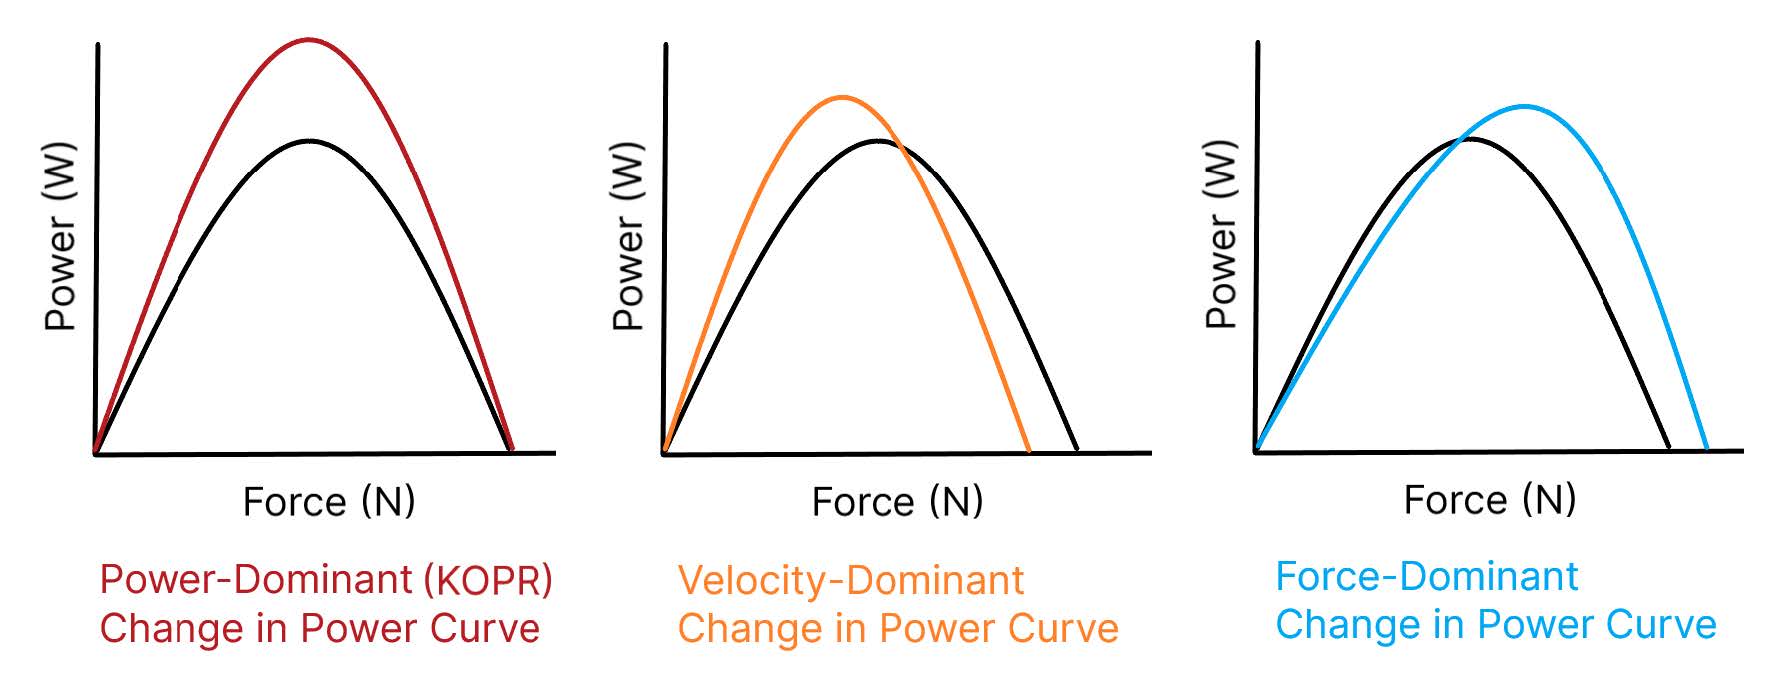 Force Curves